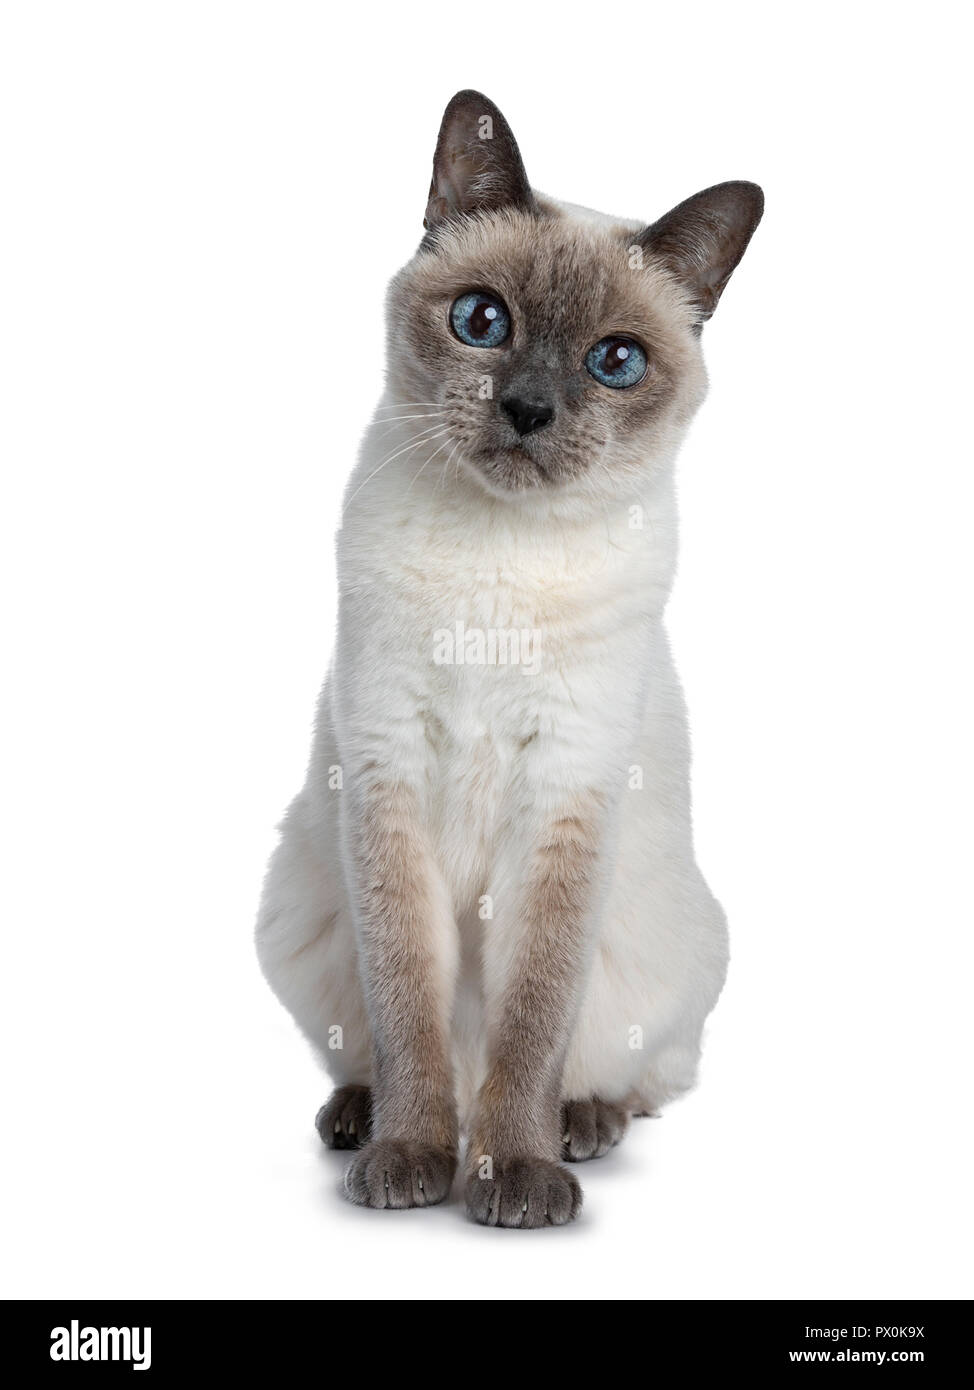 Senior blue point Thai cat sitting front view, looking straight in camera with blue wise eyes. Isolated on white background. Stock Photo